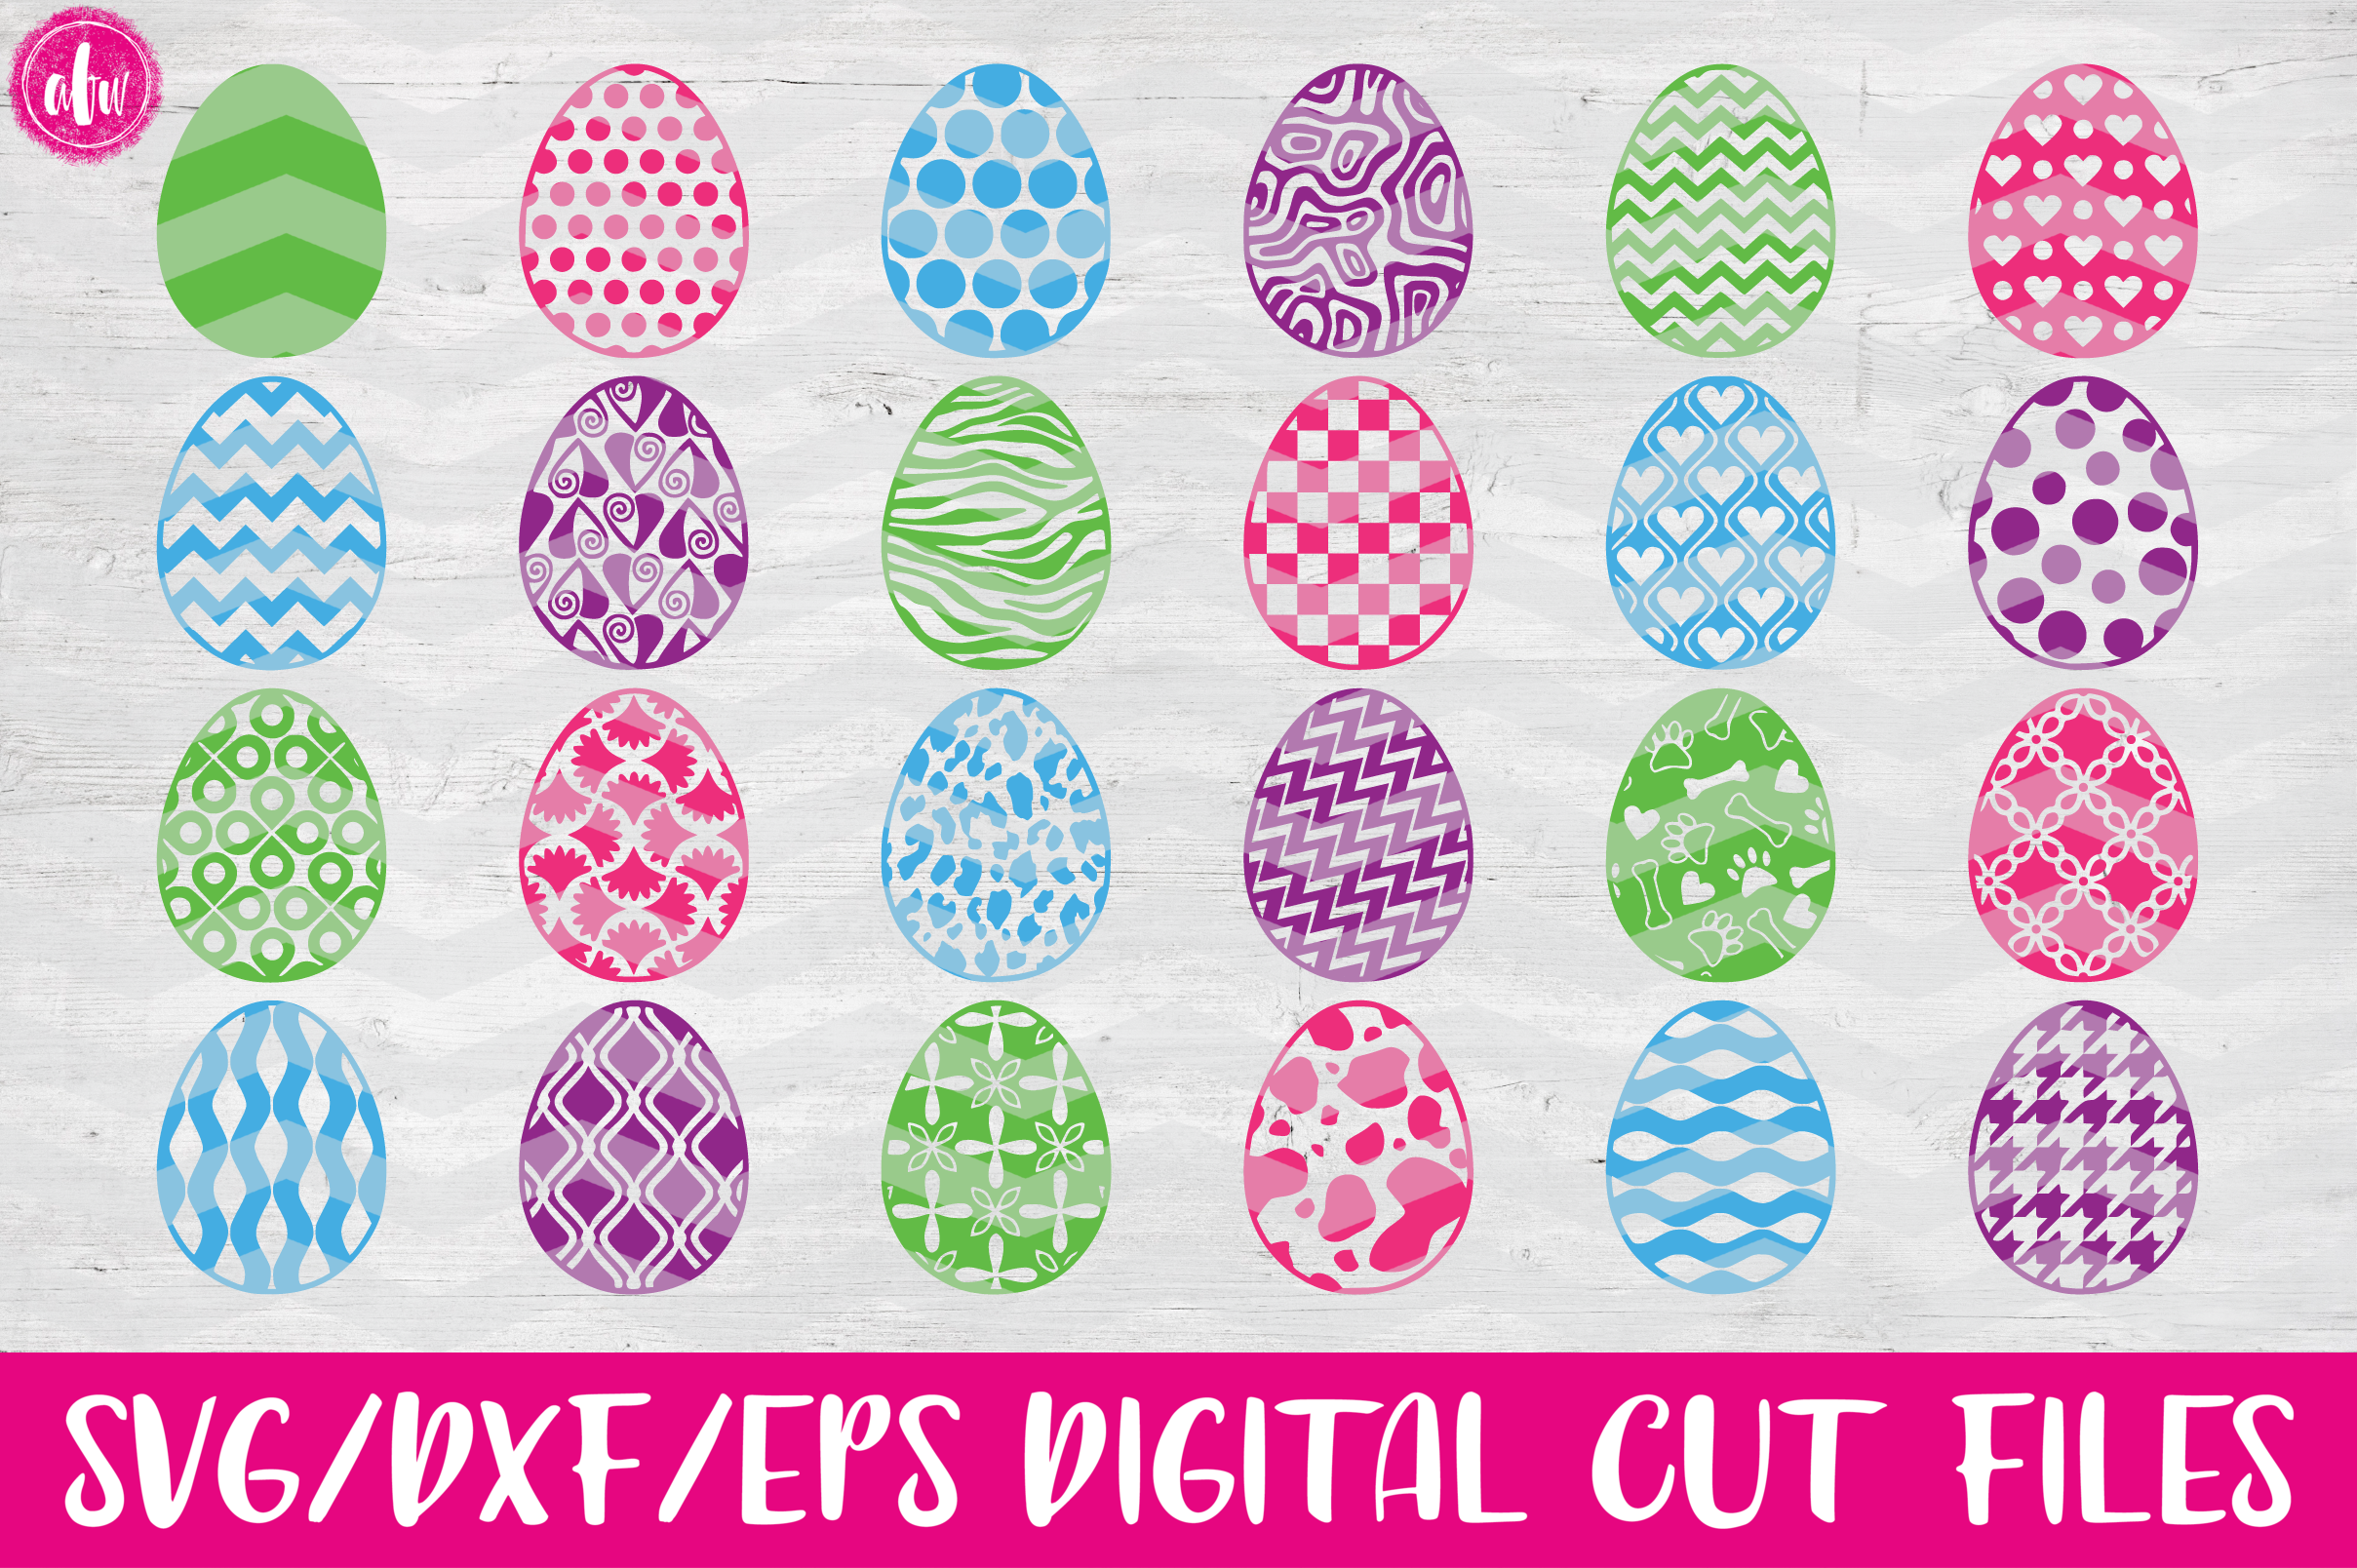 Pattern Easter Eggs Set of 40 - SVG, DXF, EPS Cut Files ...